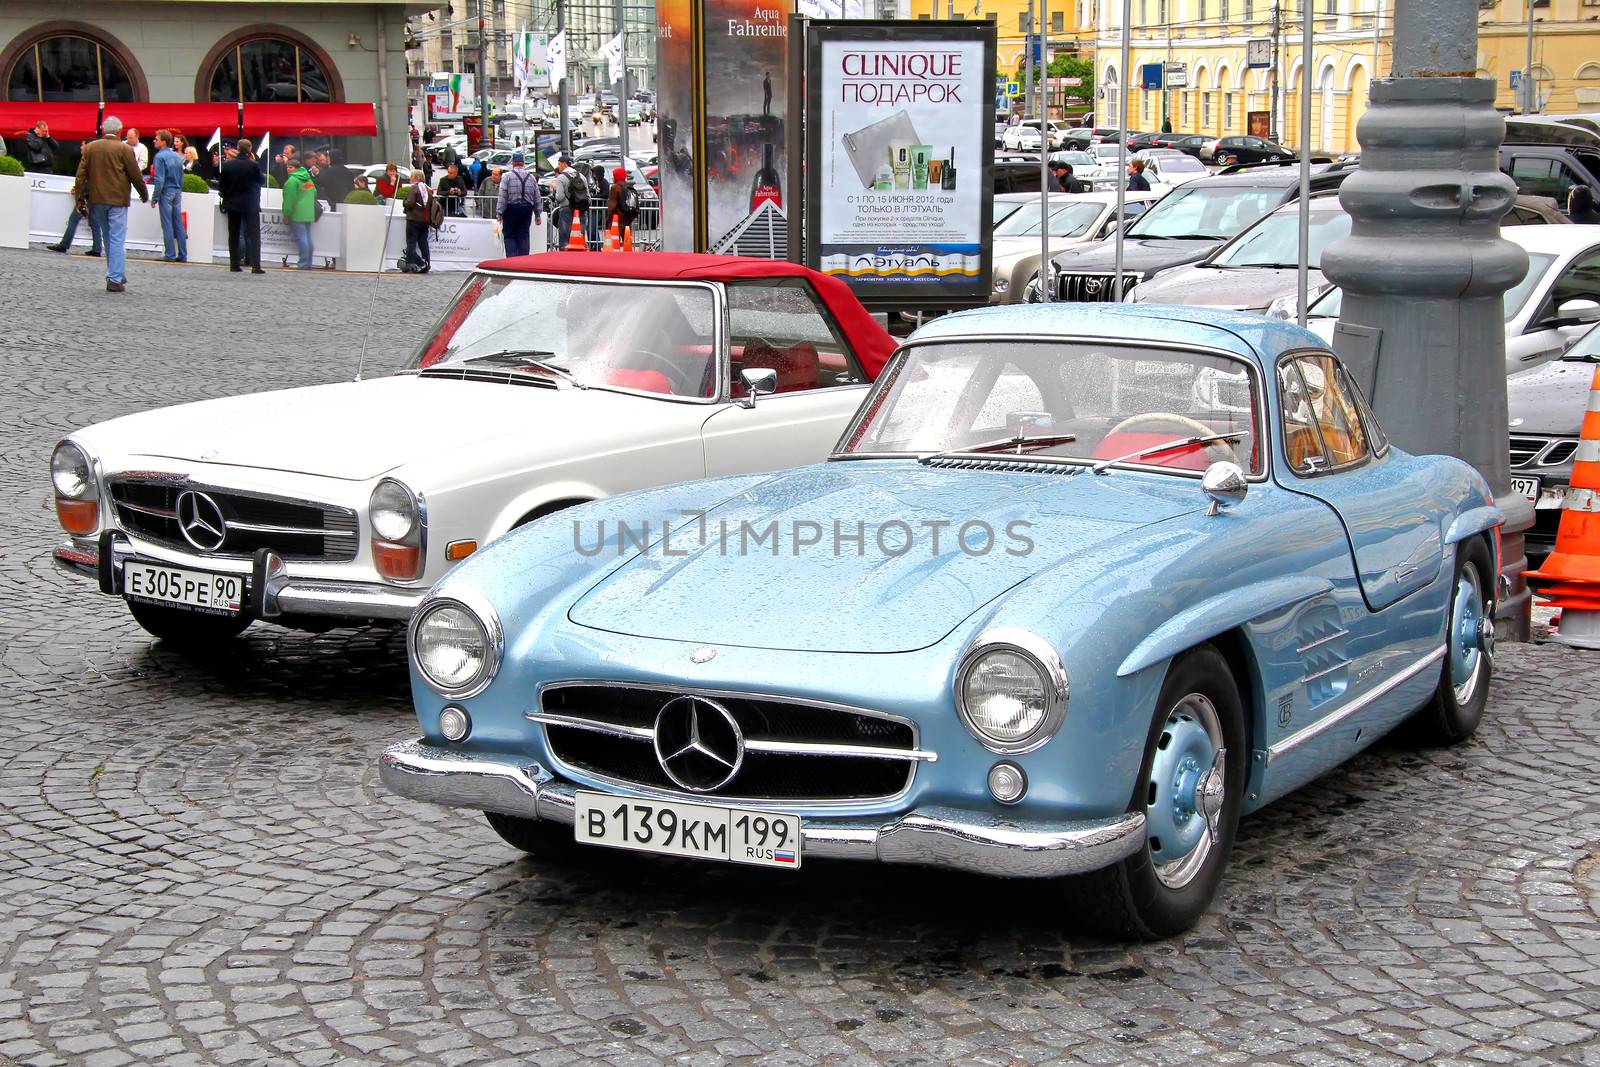 MOSCOW, RUSSIA - JUNE 3: German motor car Mercedes-Benz 300SL competes at the annual L.U.C. Chopard Classic Weekend Rally on June 3, 2012 in Moscow, Russia.